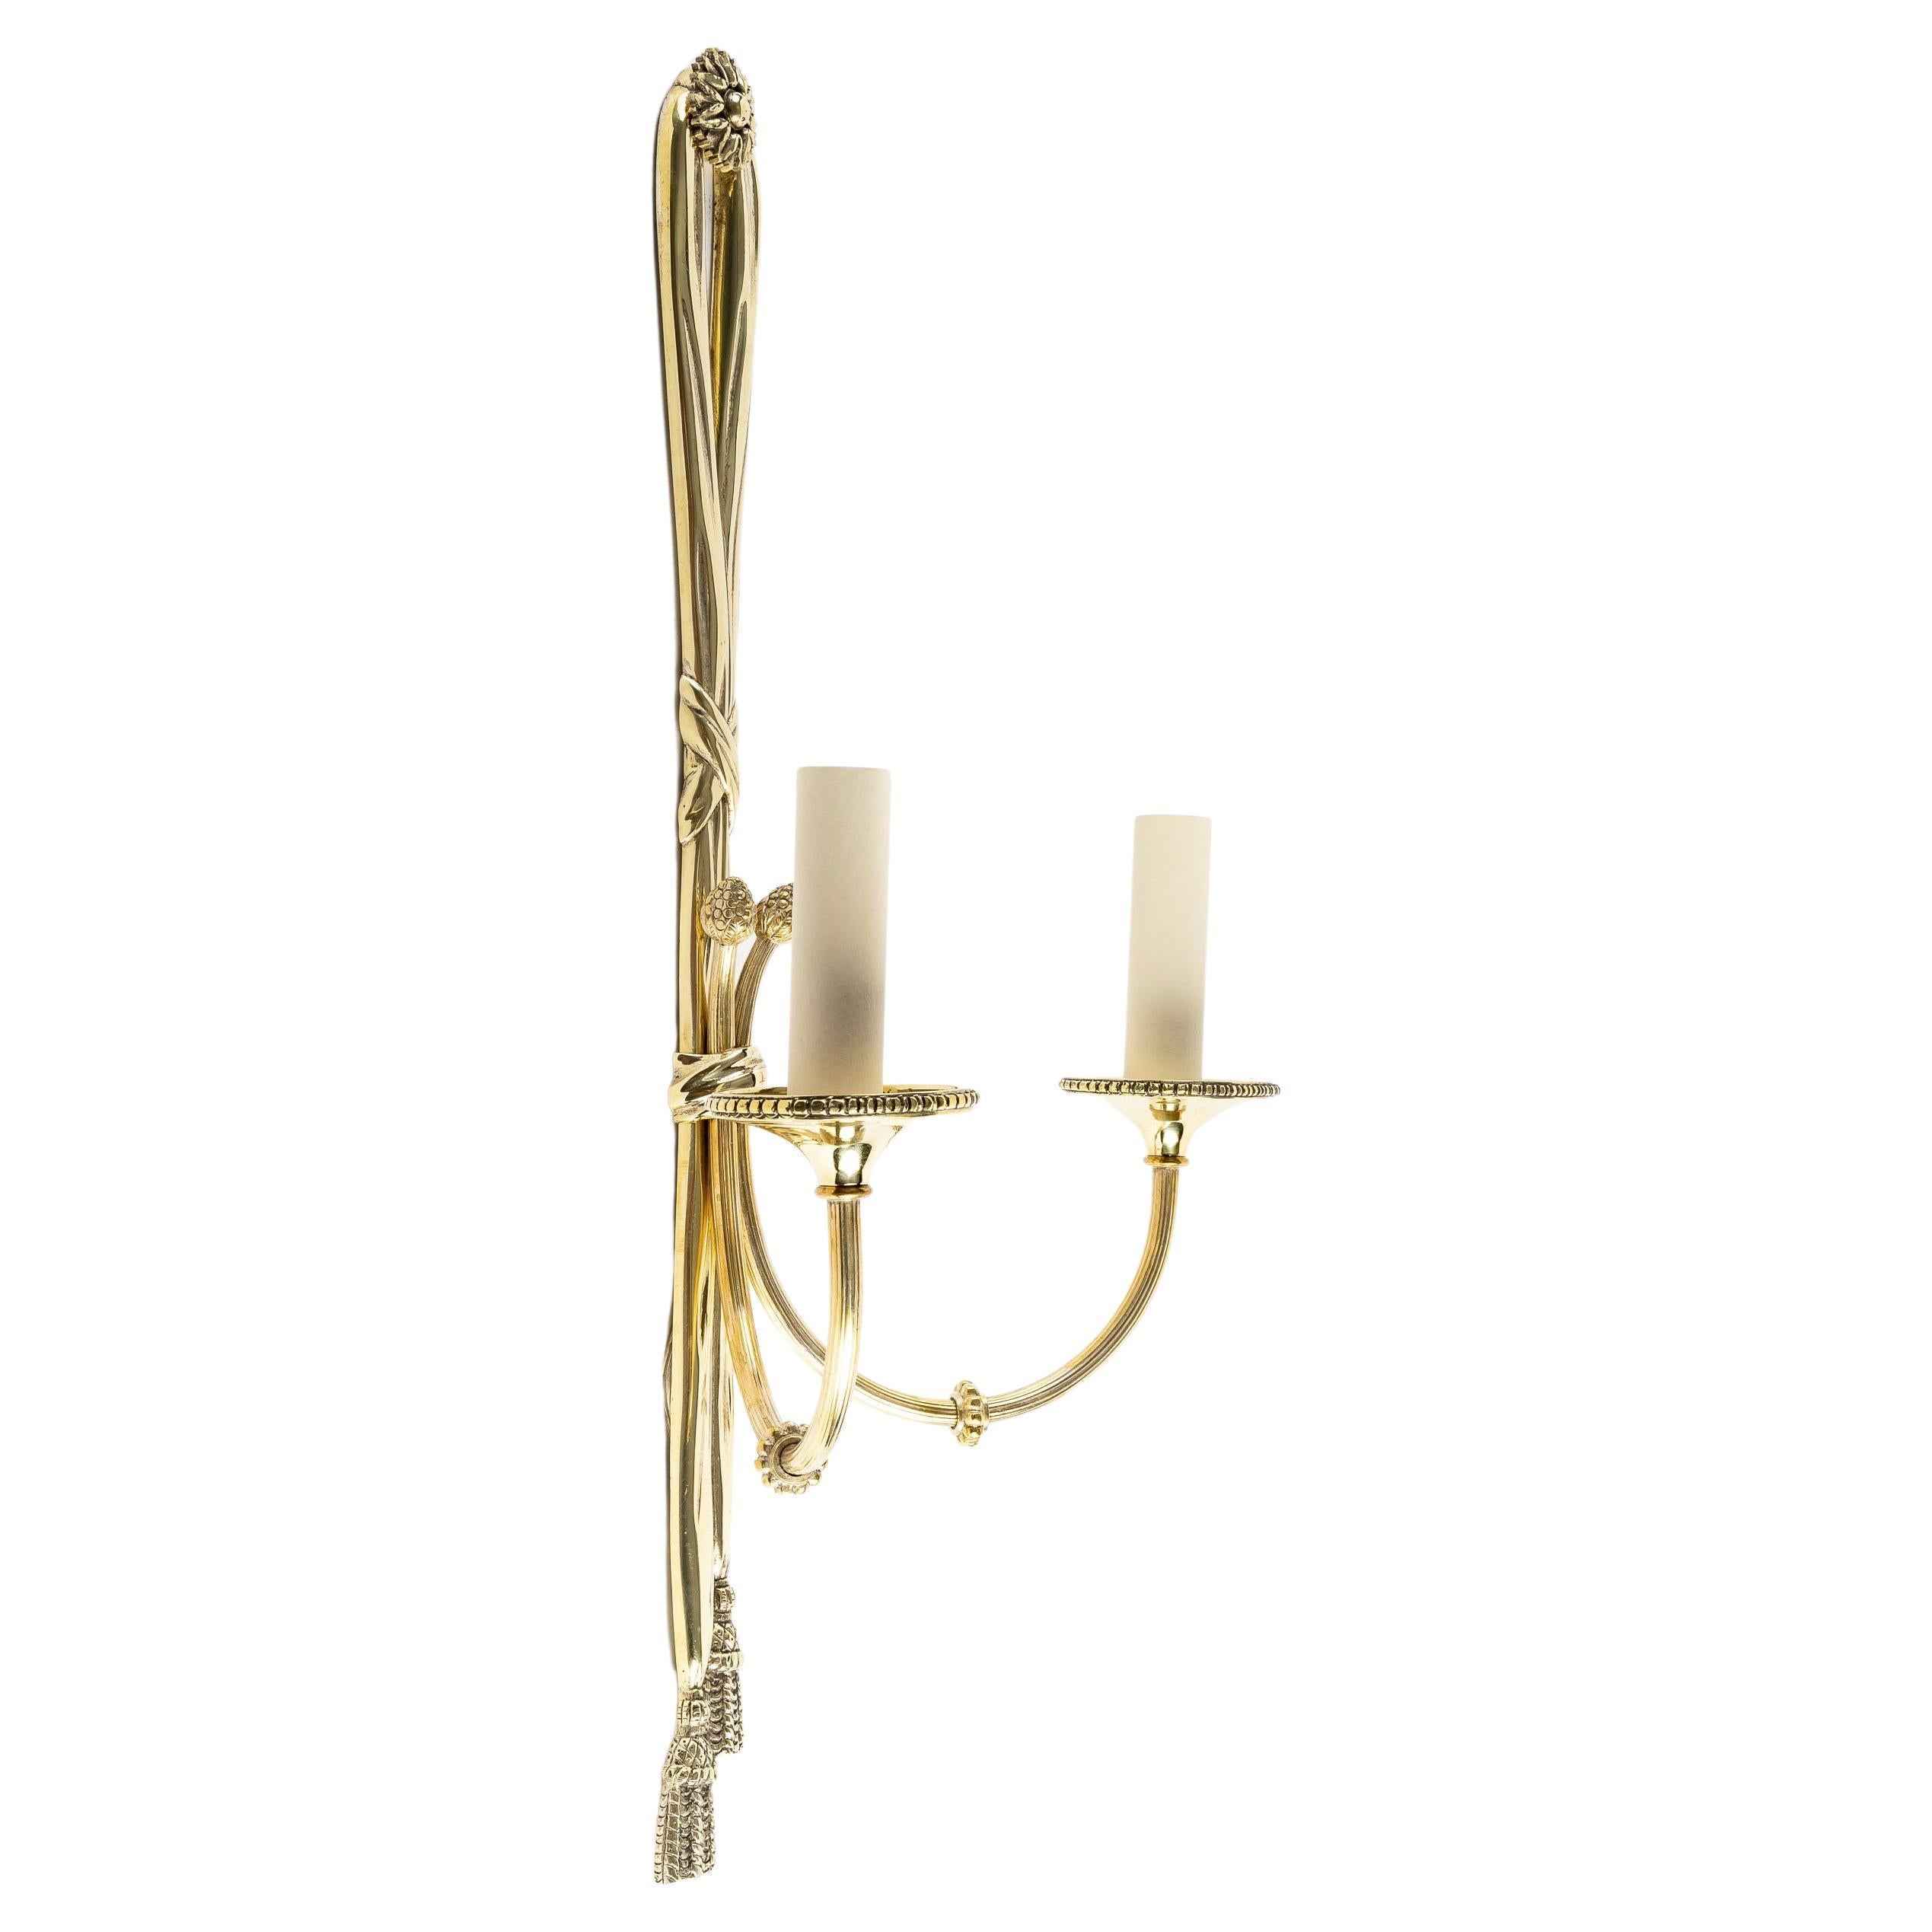 French 1950 Pair of Neoclassical Sconces in Bronze from the House of Lucien Gau For Sale